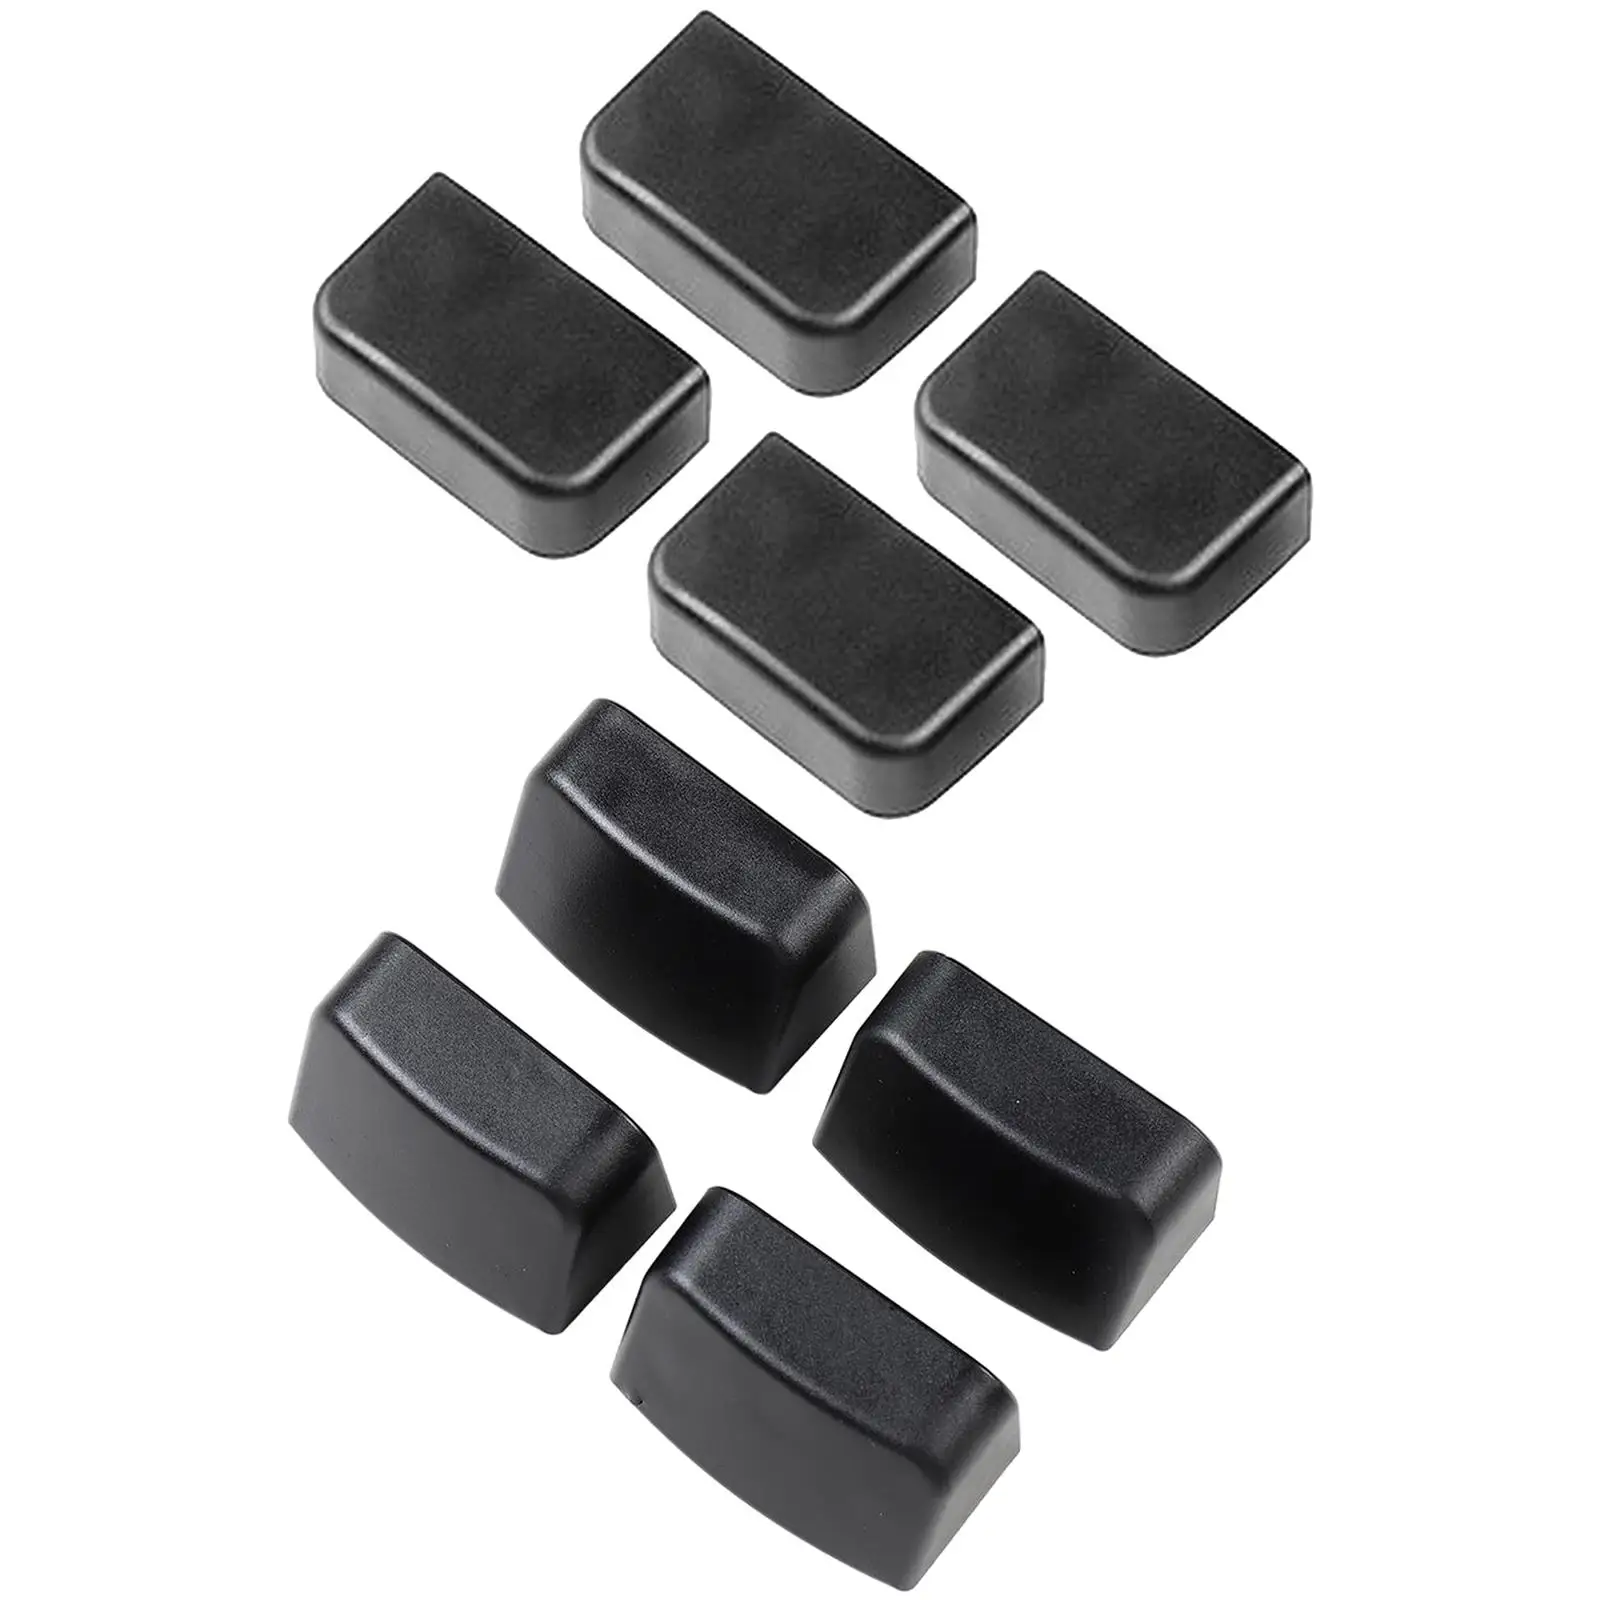 4x Slide Rail Plugs Auto Functional Accs ABS Car Interior Rear Seat Soft Rubber Plugs Protection Fits for Tesla Model 3 Model Y